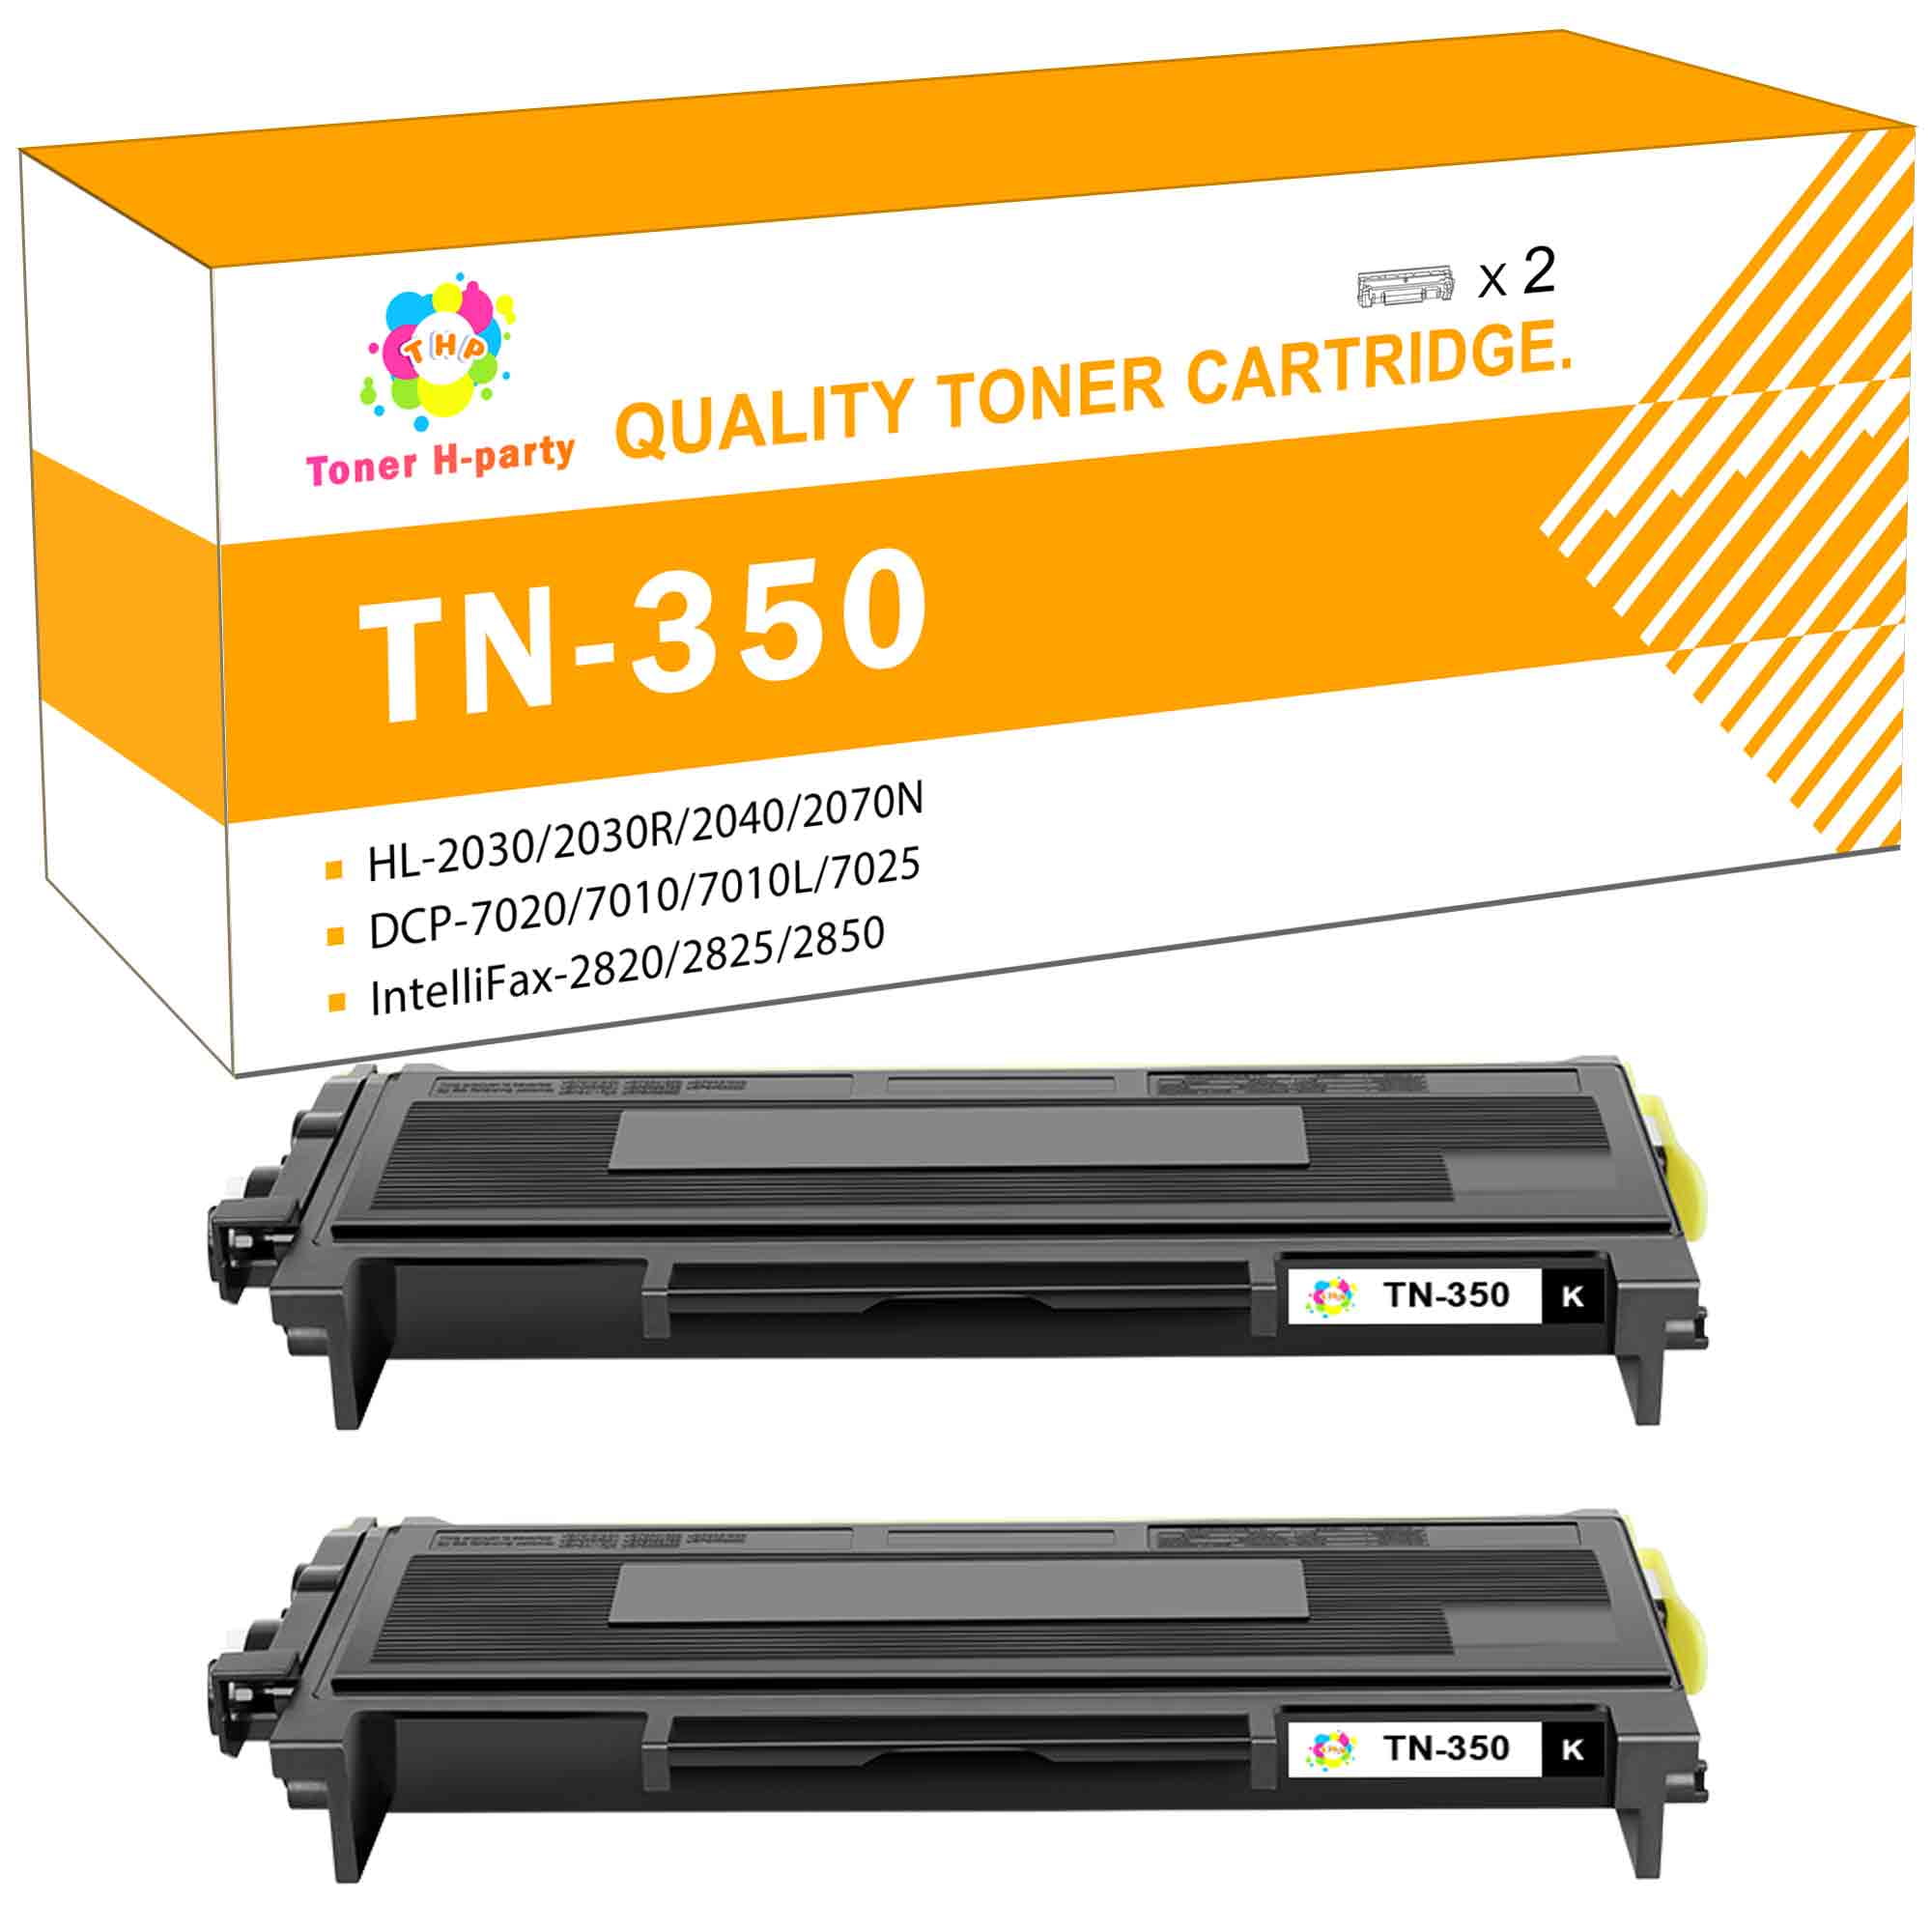 H-Party Compatible Toner Cartridge Replacement for Brother TN350 TN-350 HL-2030 2040 2070 2035 2037 2037E MFC-7220 DCP-7010 7020 (Black, 2 Pack) - Walmart.com